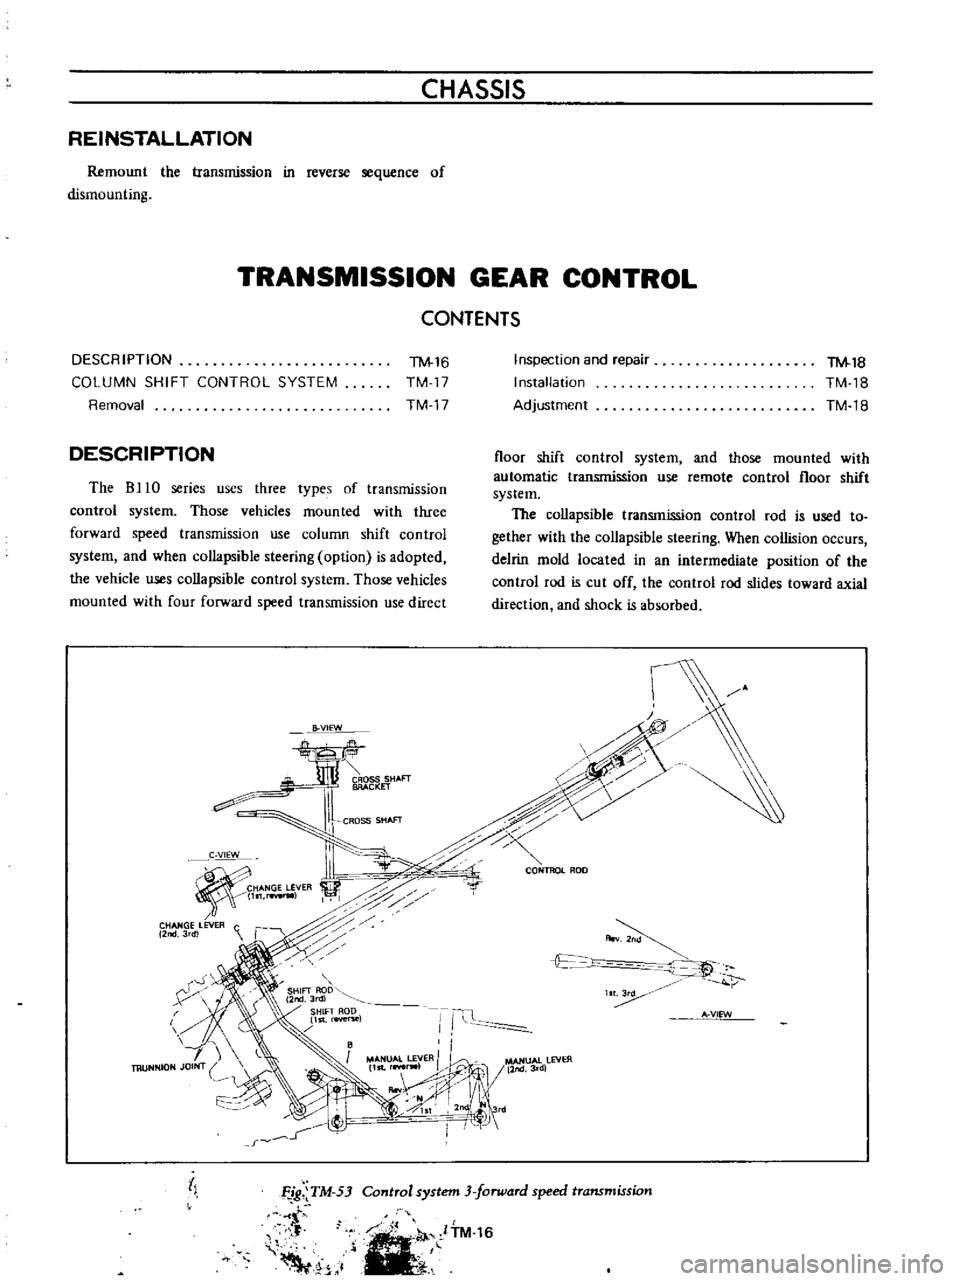 DATSUN B110 1973  Service Repair Manual 
CHASSIS

REINSTALLATION

Remount 
the 
transmission 
in

reverse

sequence 
of

dismounting

TRANSMISSION

GEAR 
CONTROL

CONTENTS

DESCRIPTION

COLUMN

SHIFT 
CONTROL

SYSTEM

Removal 
TM 
16

TM 
1